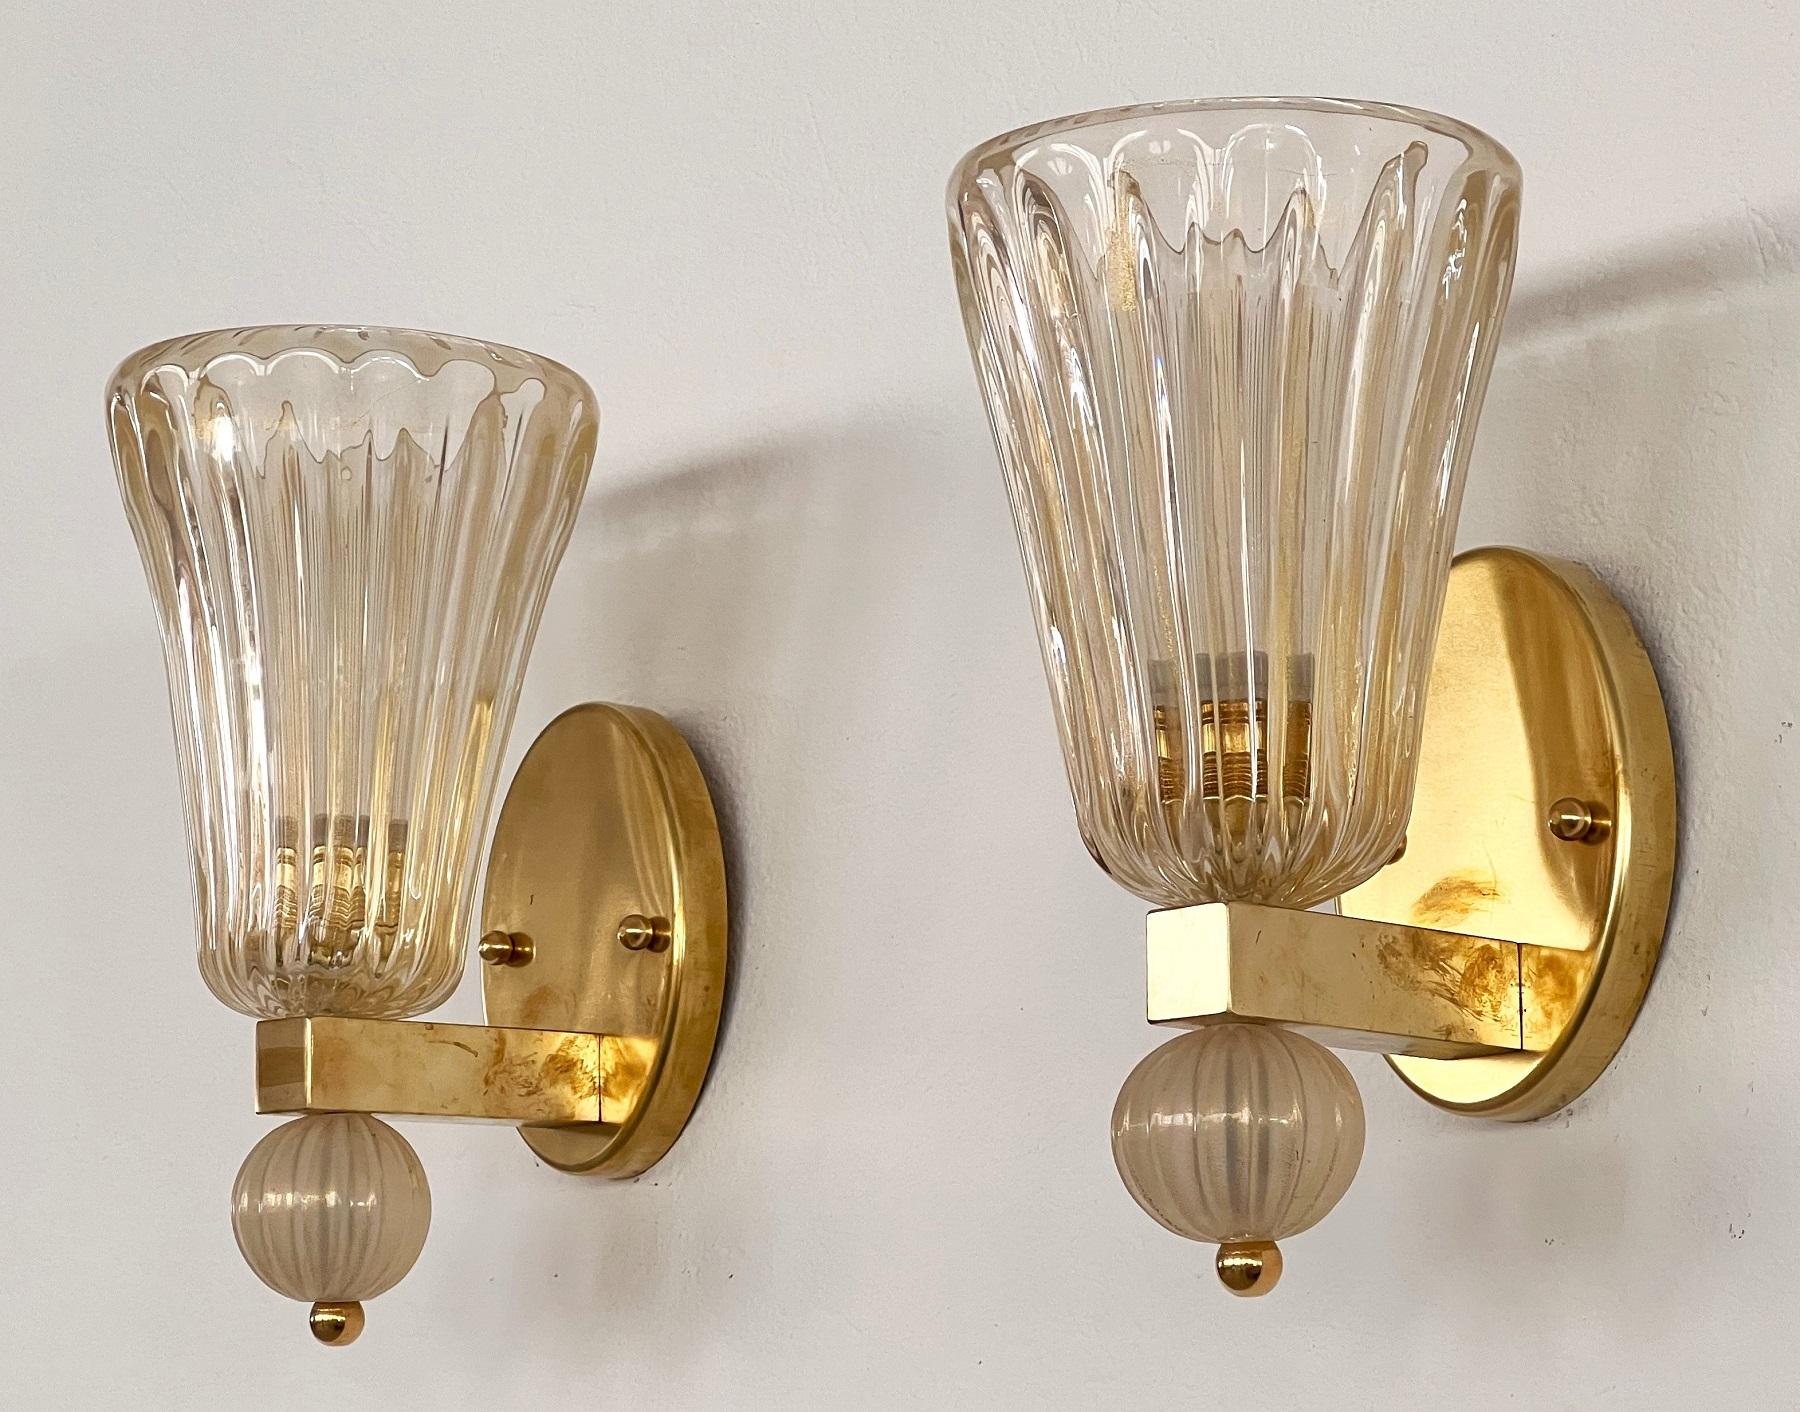 Hand-Crafted Italian Brass and Murano Glass Wall Lights or Sconces in Art Deco Style, 1990s For Sale